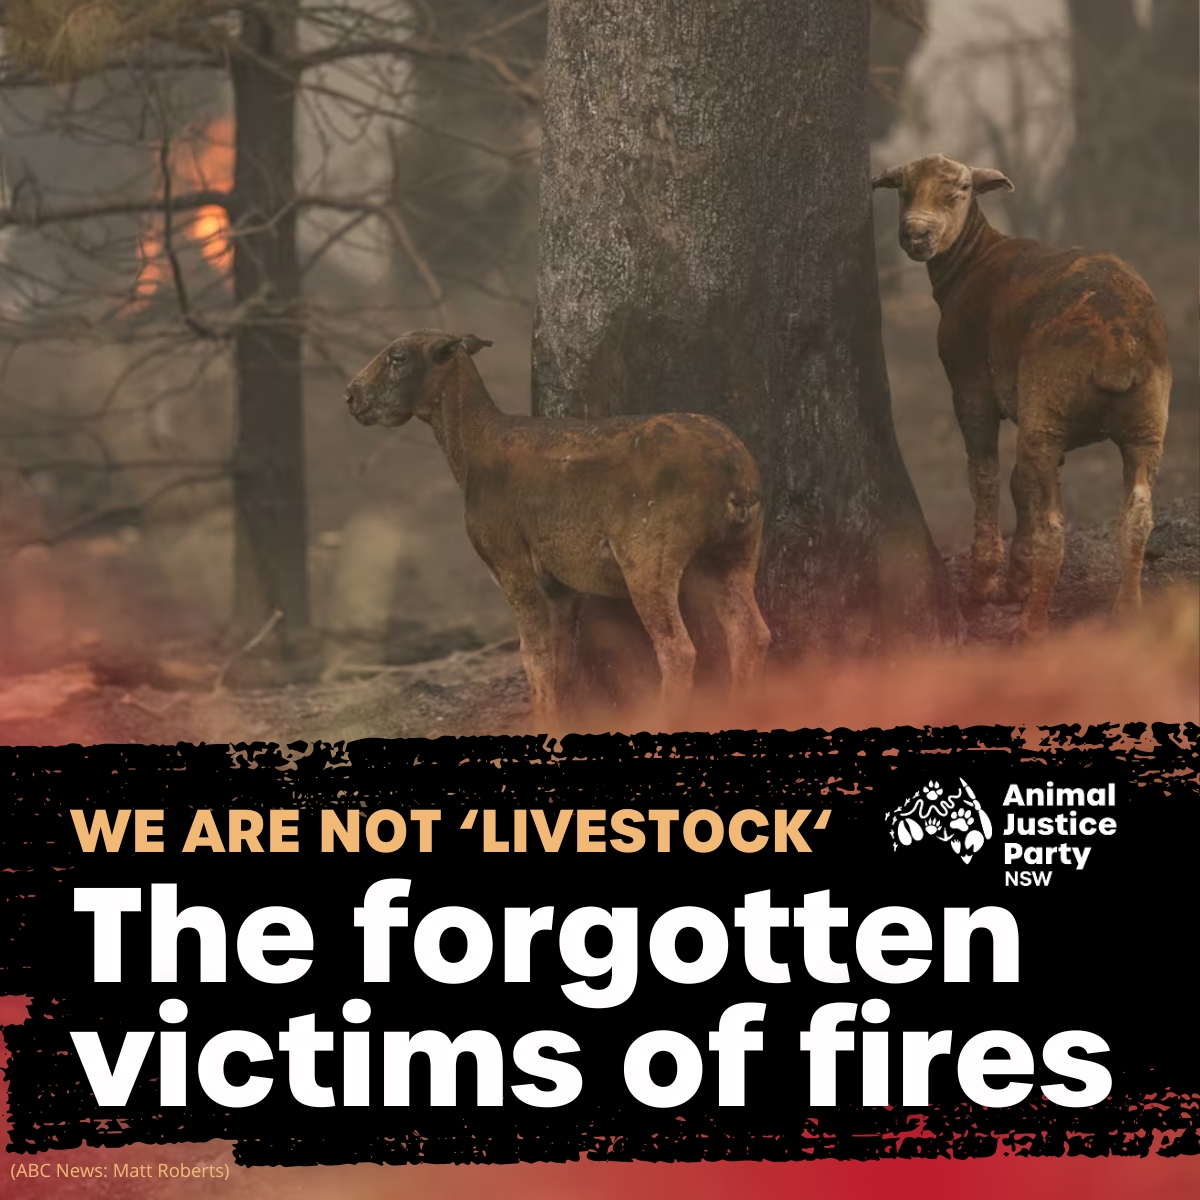 While the recent bushfires across Australia have tragically impacted many, our hearts ache for the animals who suffer. They lose their homes, flee in terror and witness unimaginable loss of their friends and family. We want to be their voice. #AnimalAdvocacy #BushfiresAustralia